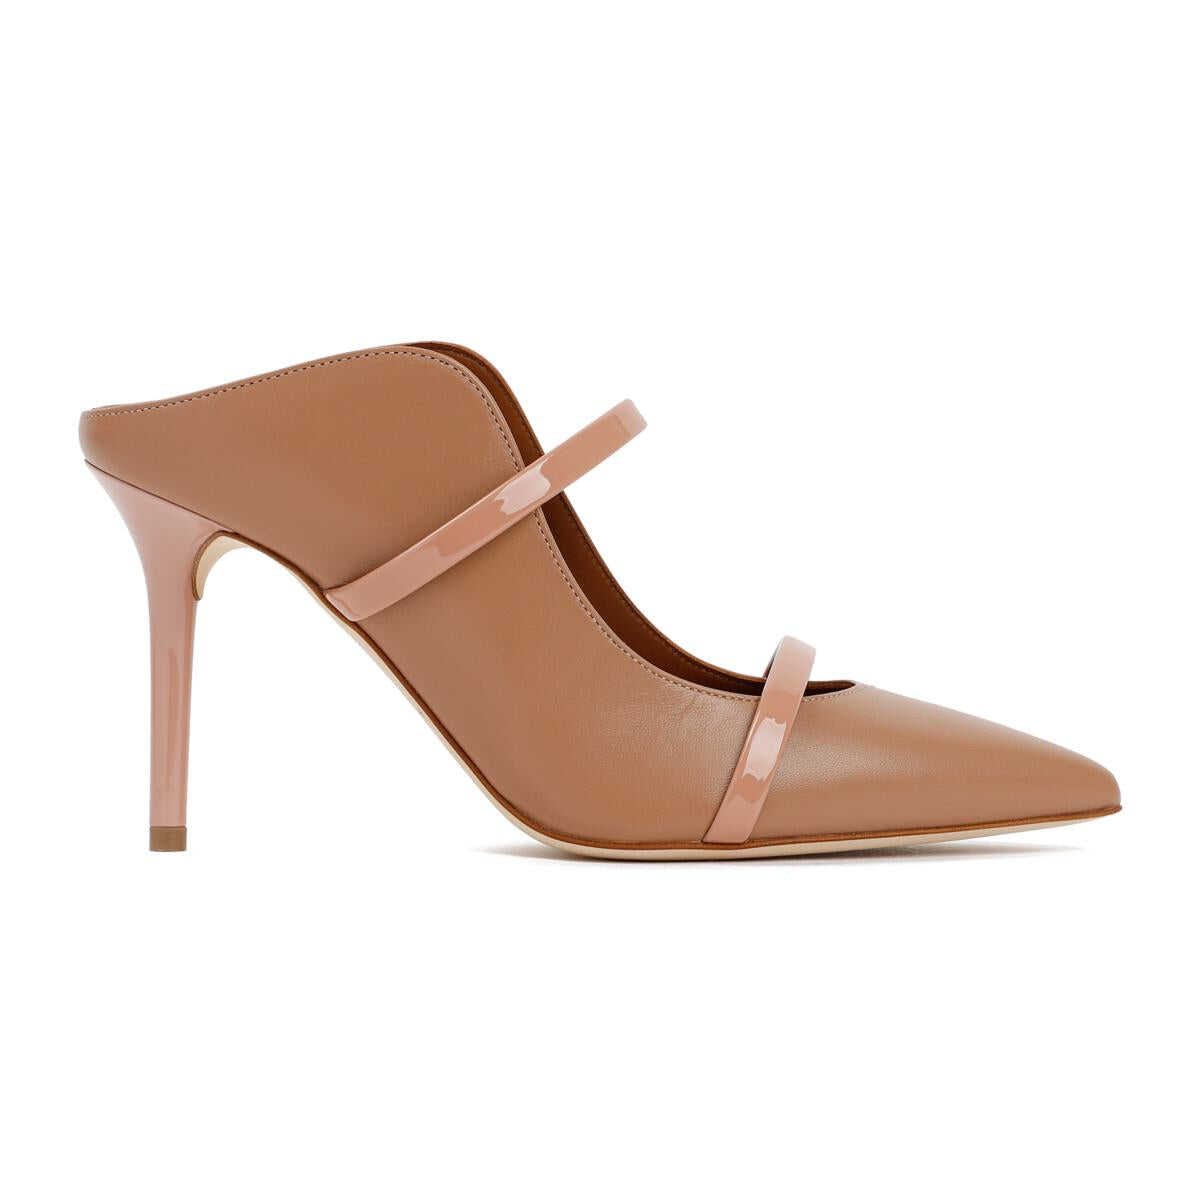 MALONE SOULIERS MALONE SOULIERS MAUREEN MS 85 MULES SHOES Nude & Neutrals